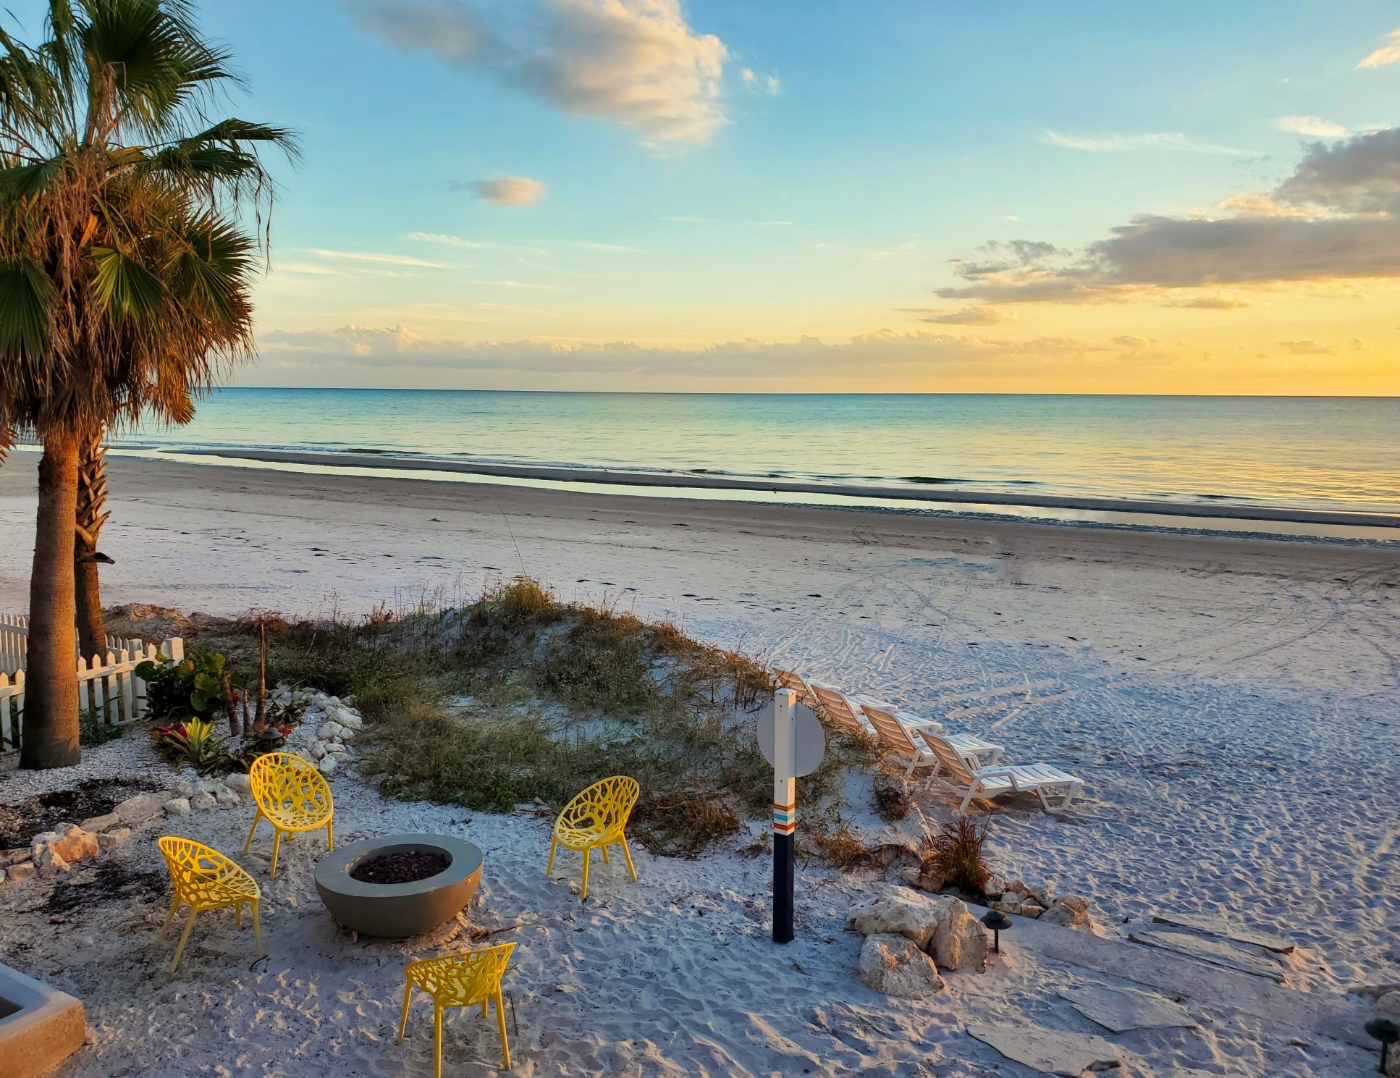 Sunburst Inn view of the beach, the Gulf of Mexico, with the modern yellow chairs and fire pit in the foreground